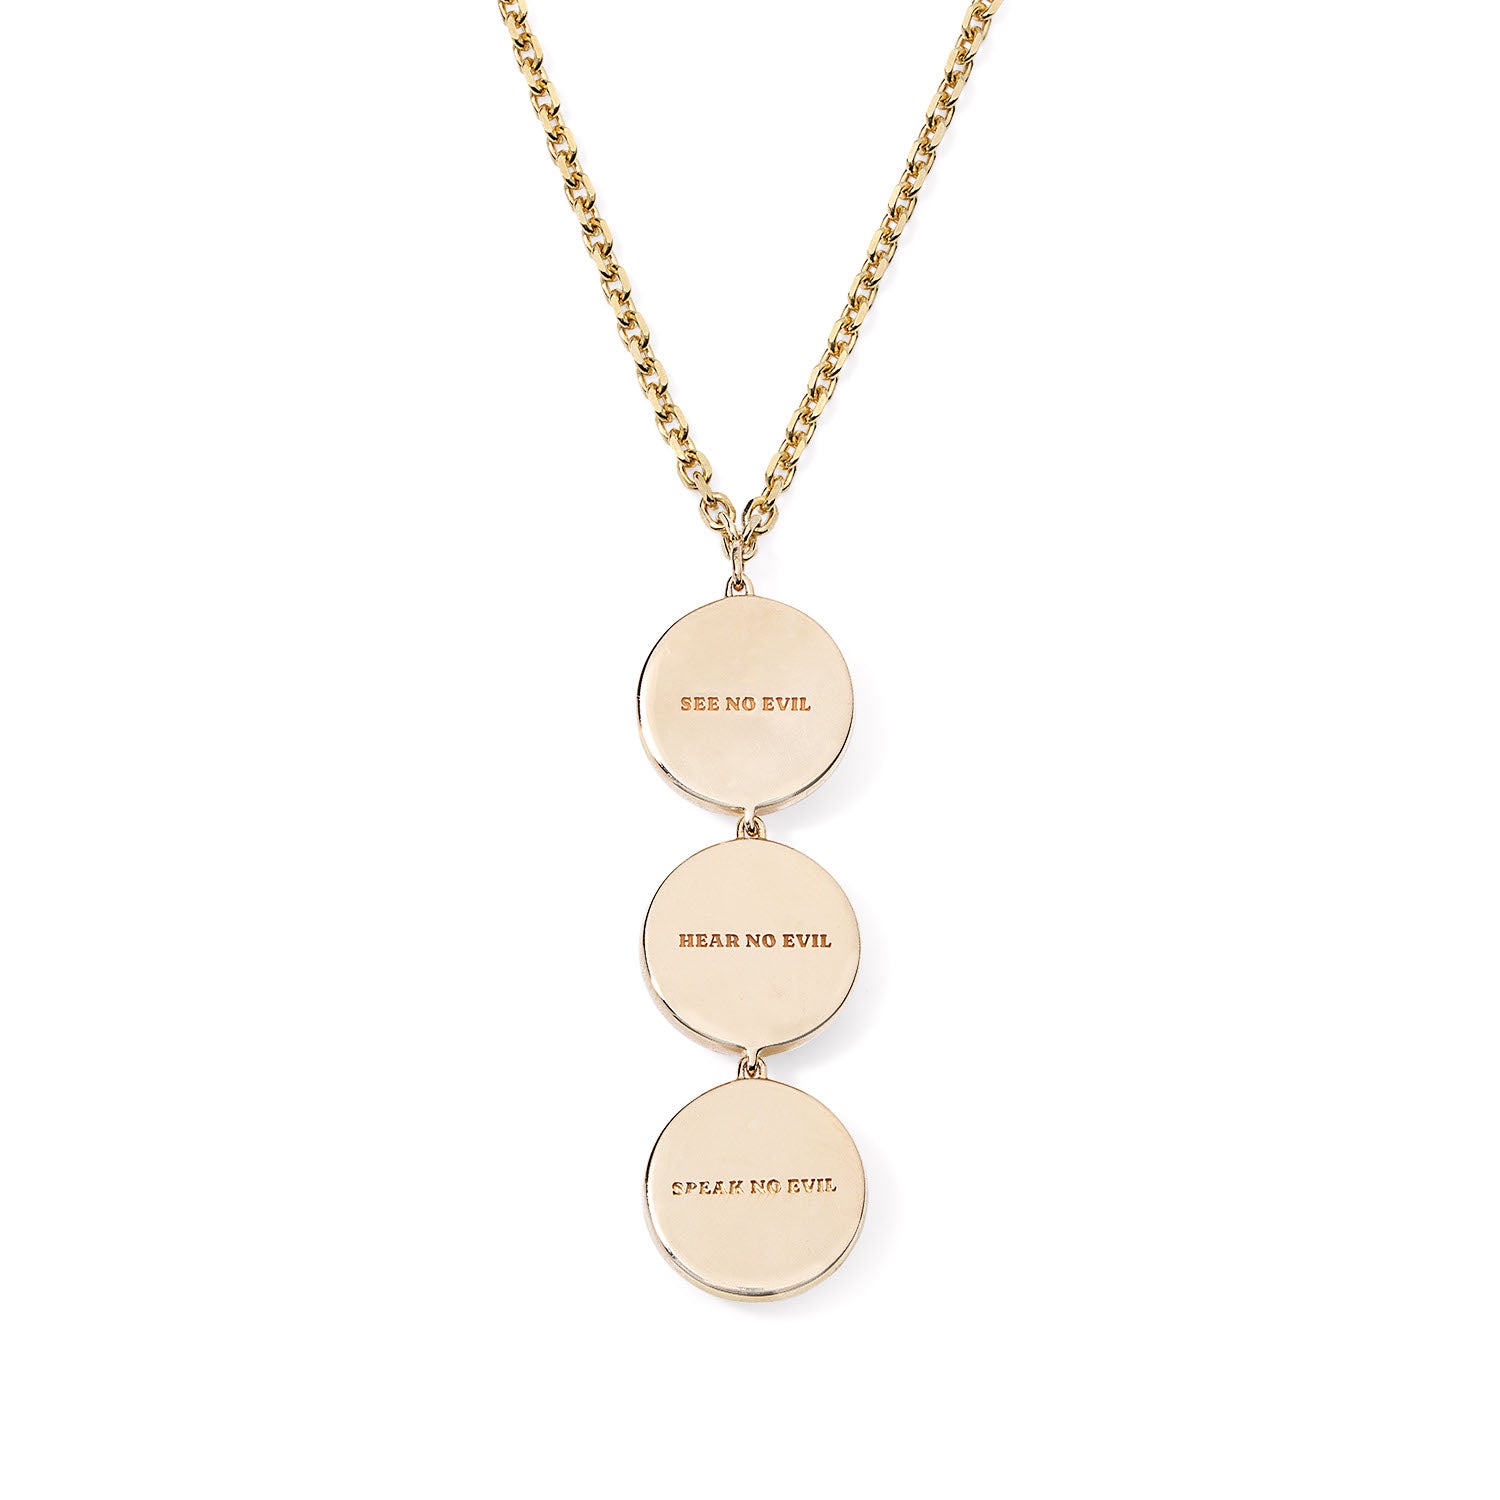 Gold Wise Monkey Medallion Drop Necklace